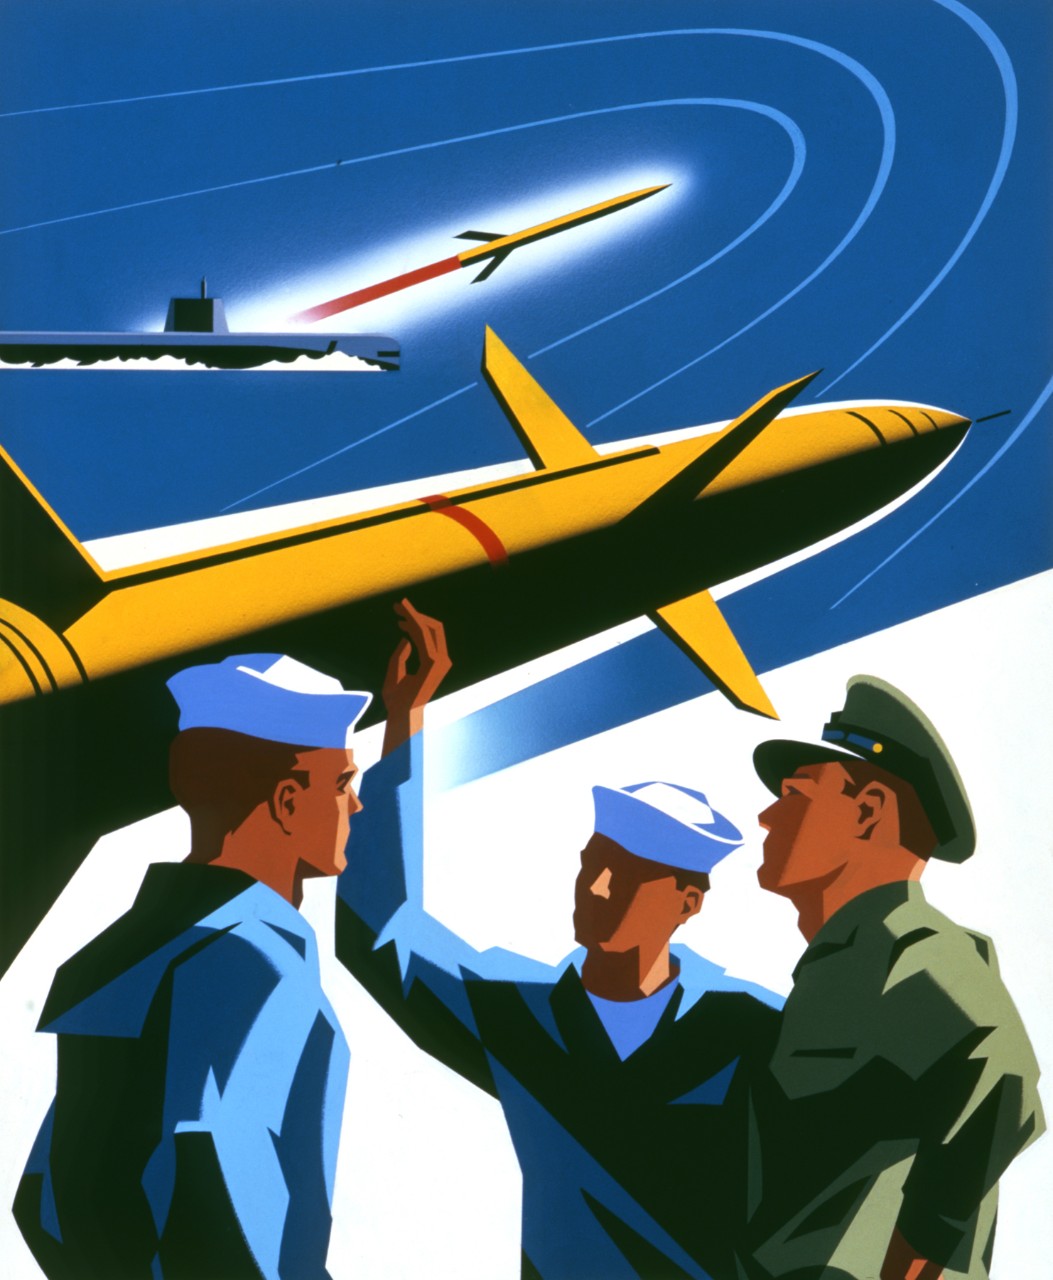 <p>There are six pennants, they say aviation, electronics, missiles, engineering, medical, atomic power, there is a destroyer in the background</p>